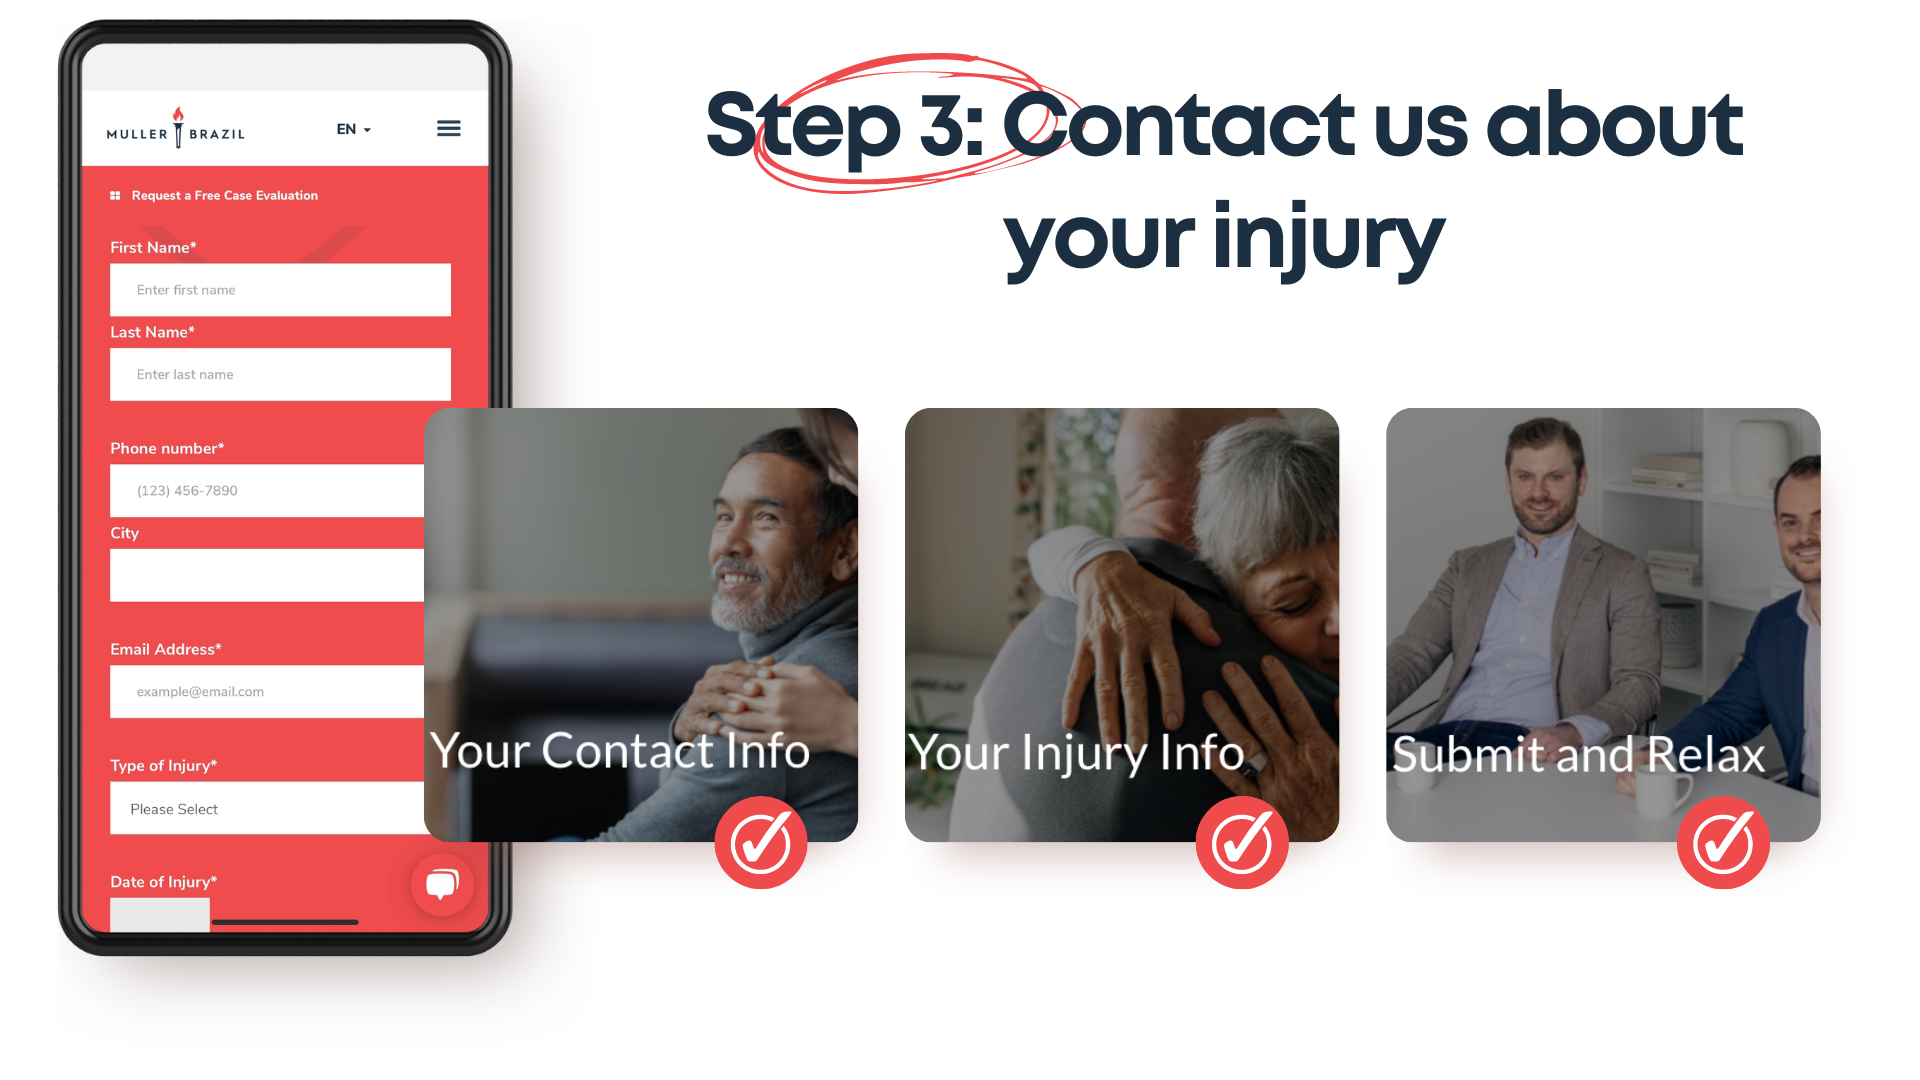 Contact Us About Your Injury